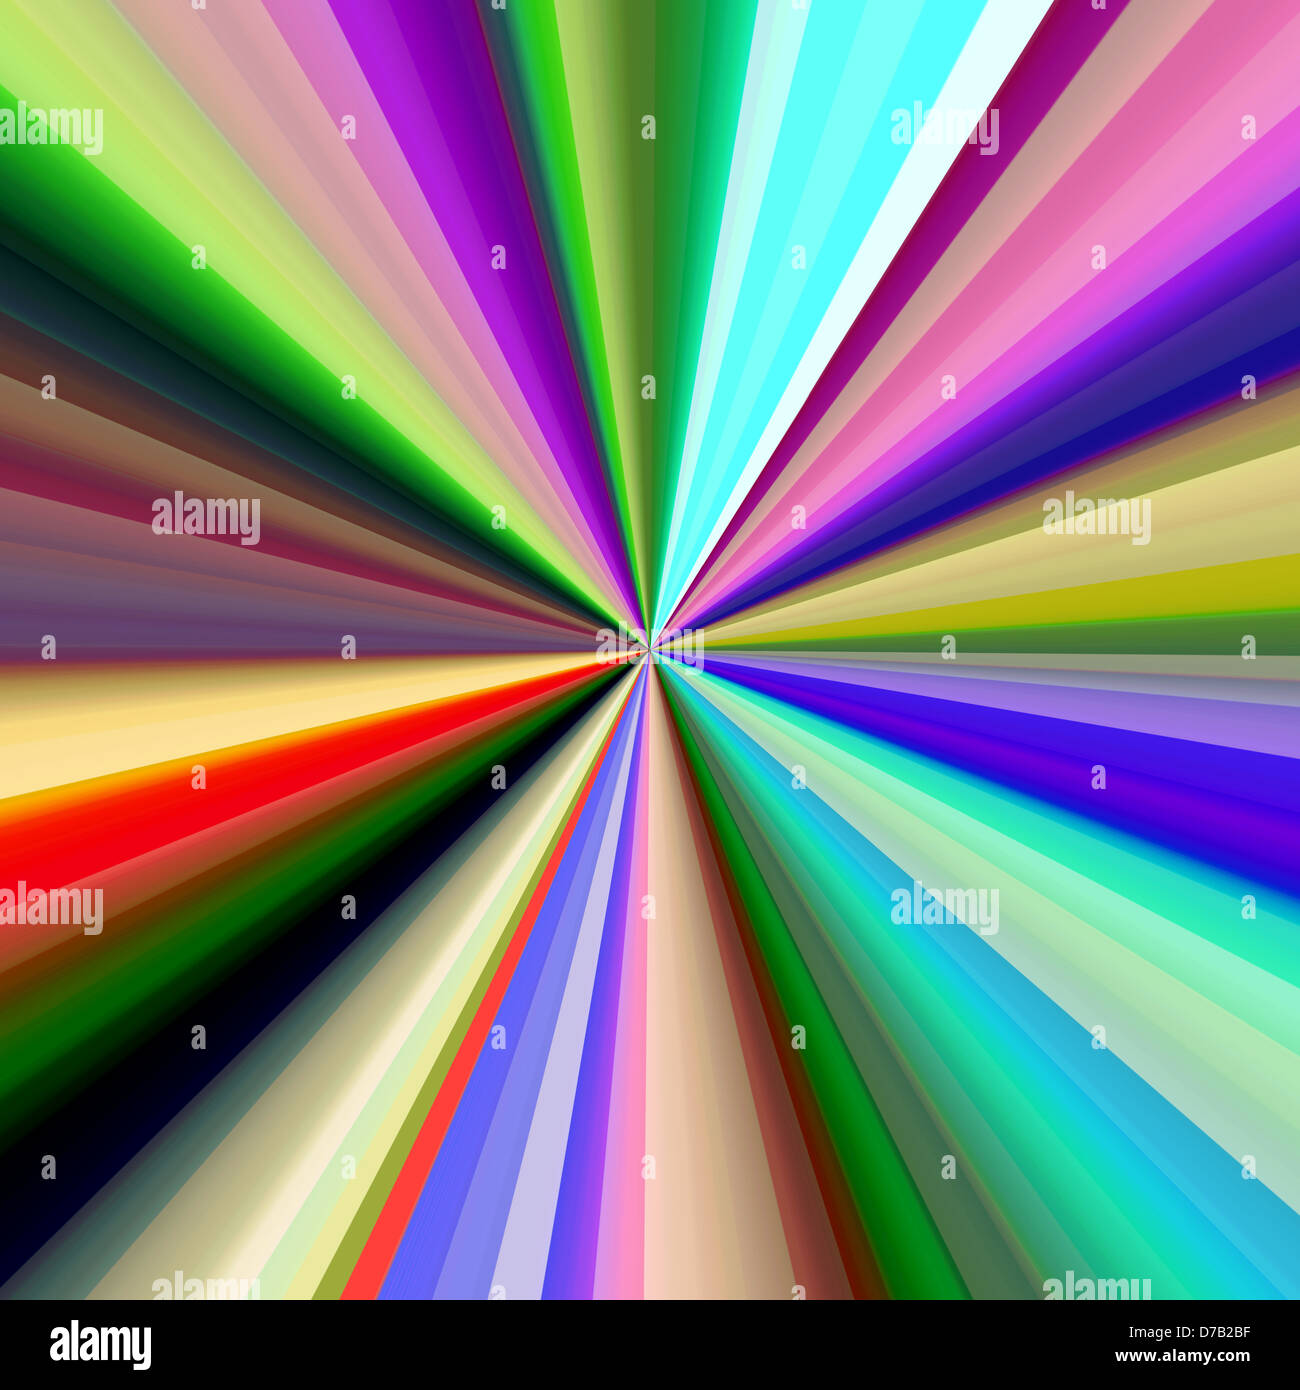 Multicoloured diagonal bands converging in a pinpoint. Stock Photo